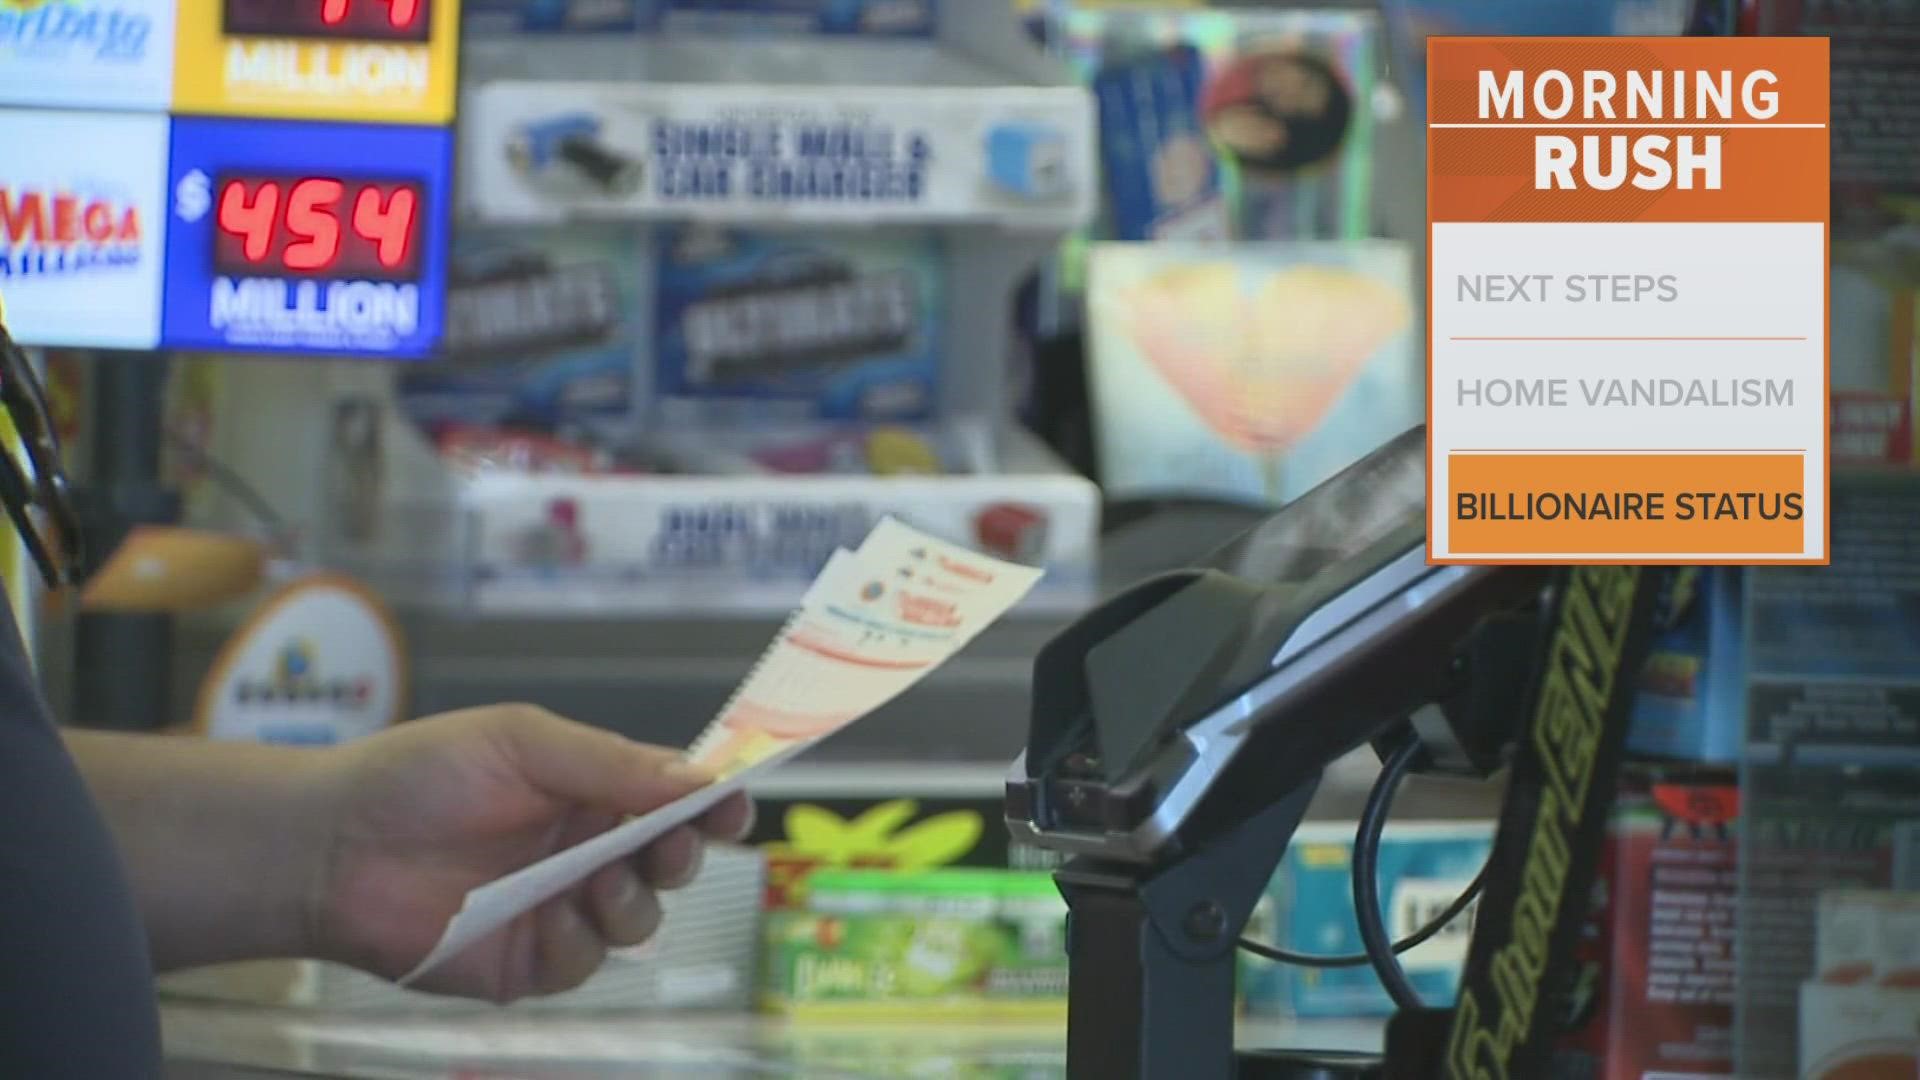 The odds of winning the Powerball jackpot are 1 in 292.2 million.